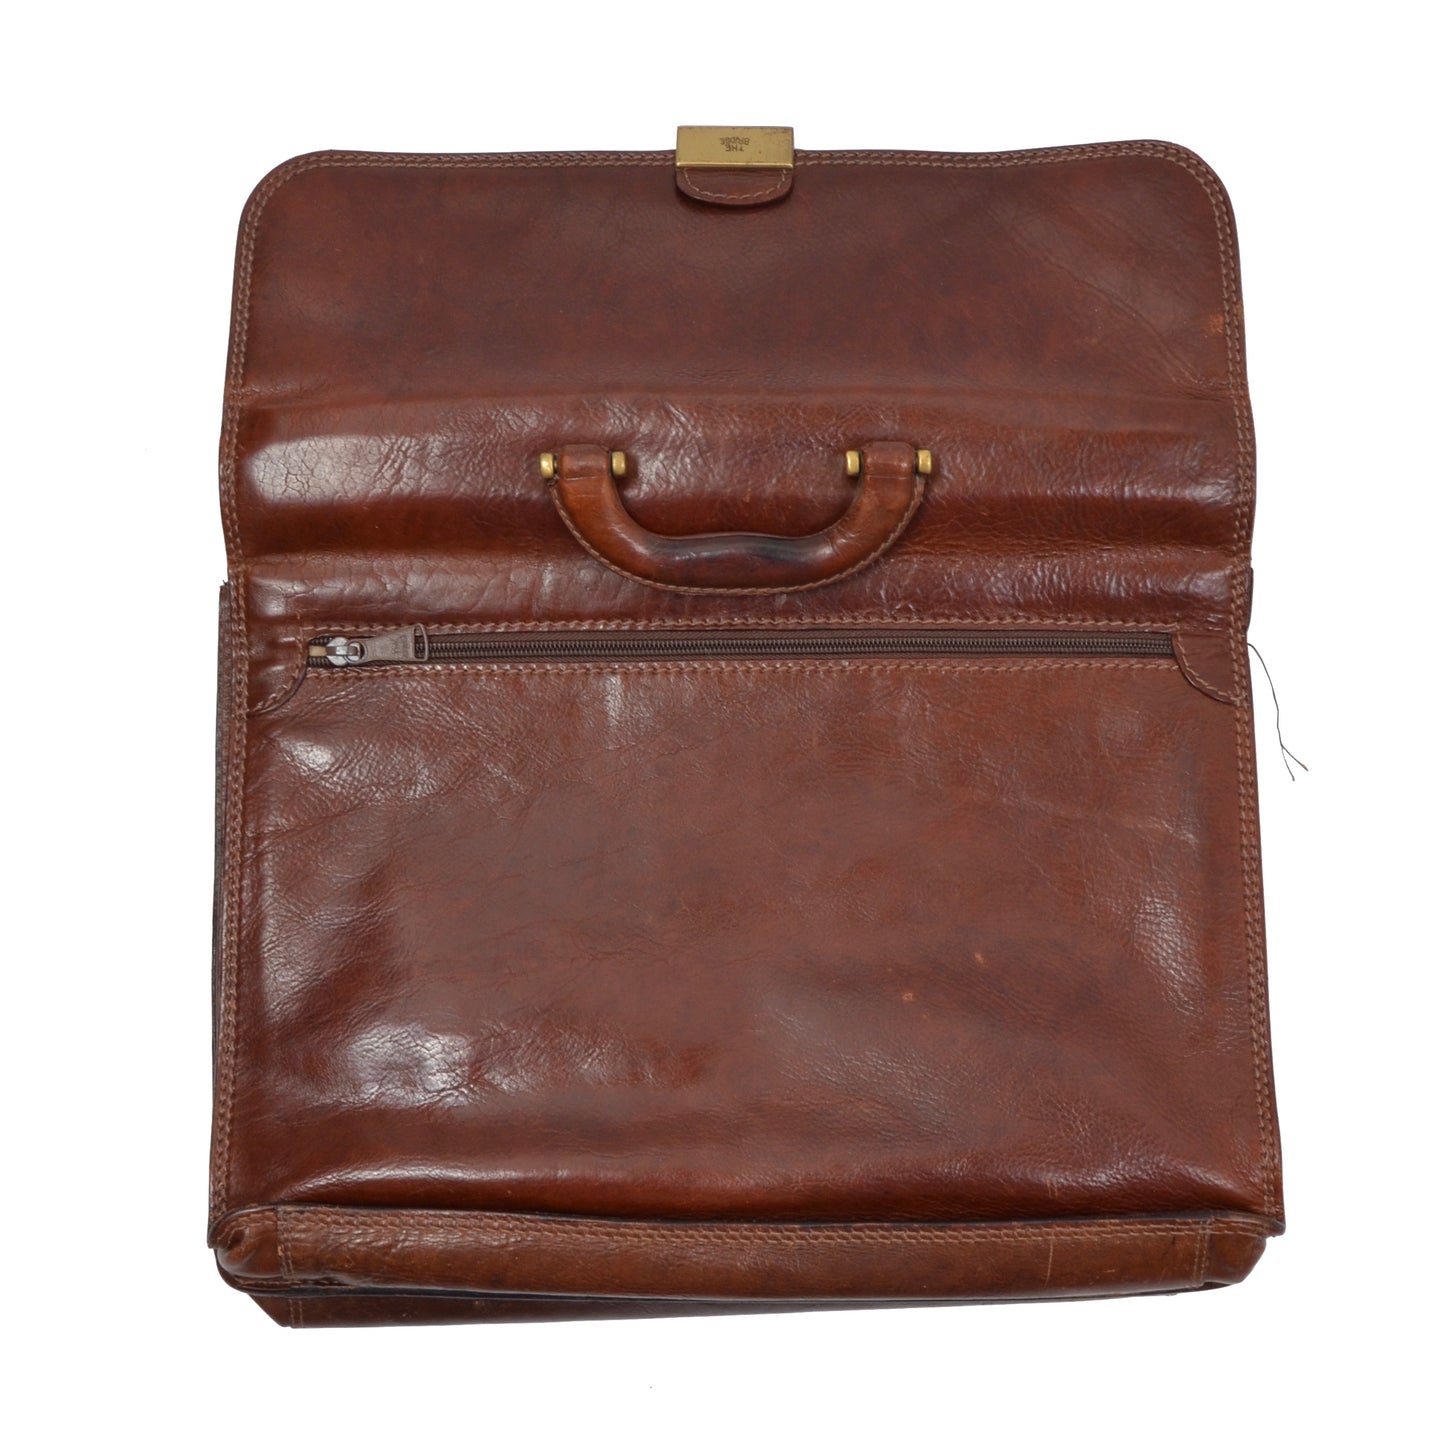 The Bridge Firenze Leather Briefcase/Business Bag - Brown 3